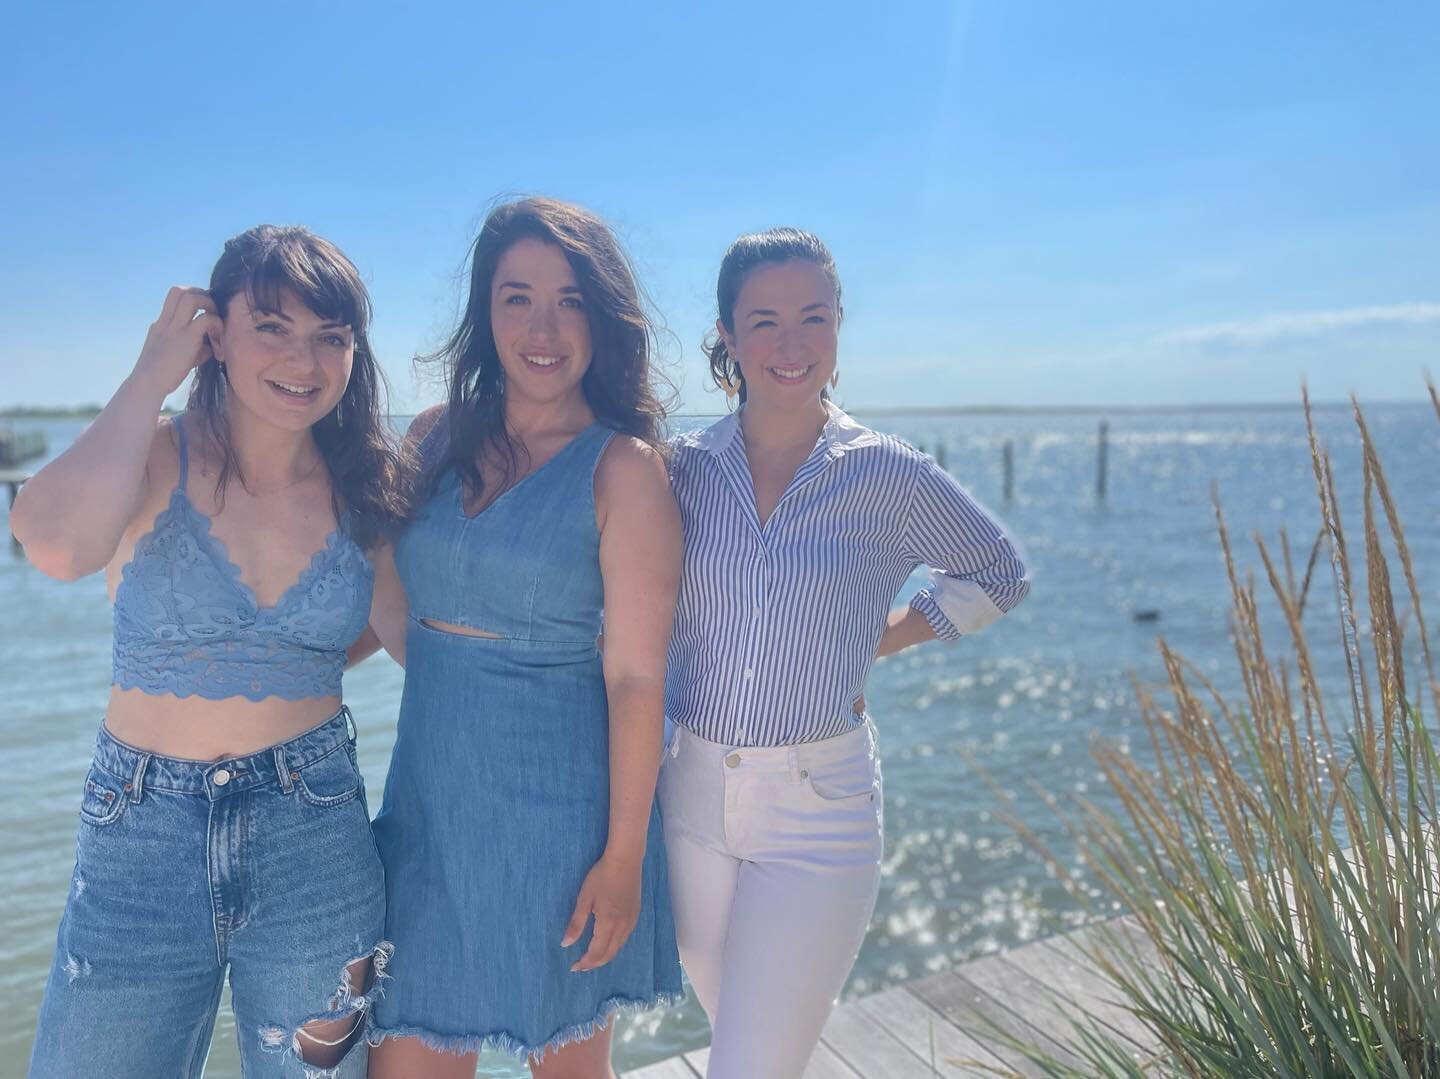 Scouting new film locations. And yes, we picked a beach ☀️🌊🌴 

📸: @katemied 
#lifesabeach #womenownedbusiness #femalefilmmakerfriday #womeninfilm #producerlife